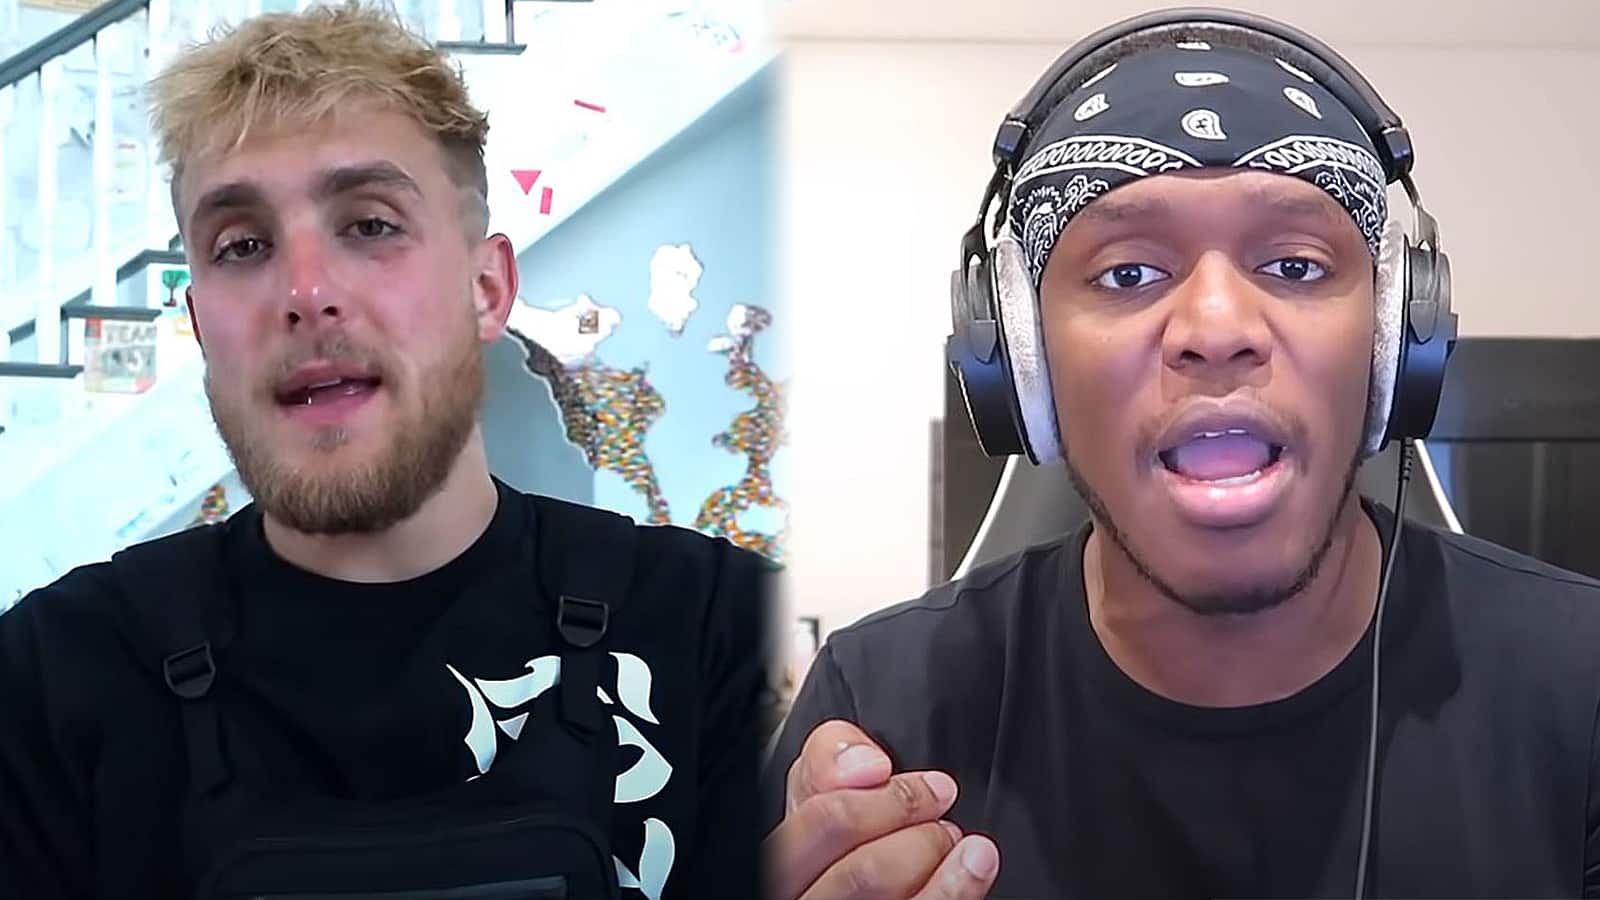 KSI predicts Jake Paul will win over Tyron Woodley